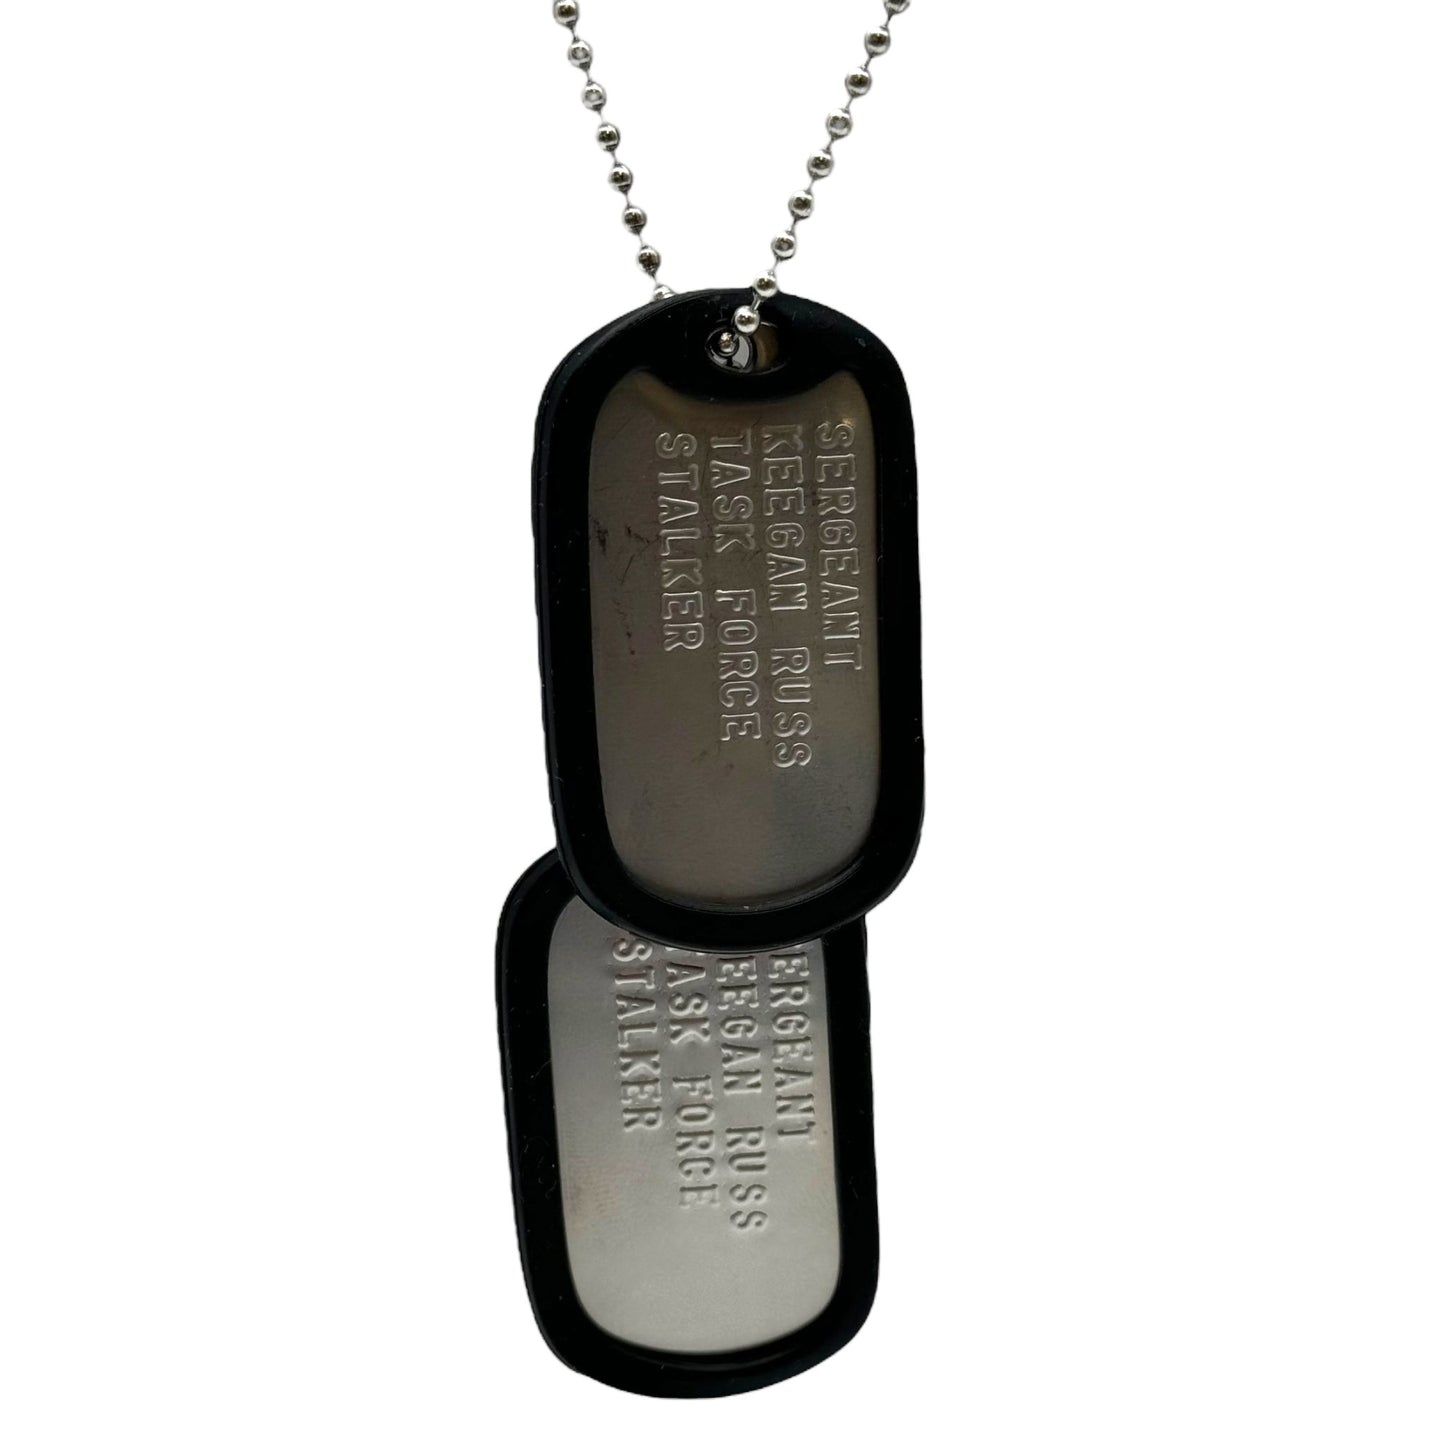 'KEEGAN RUSS' Military Dog Tags - Cosplay Costume Prop Replica - Stainless Steel Chains Included - TheDogTagCo